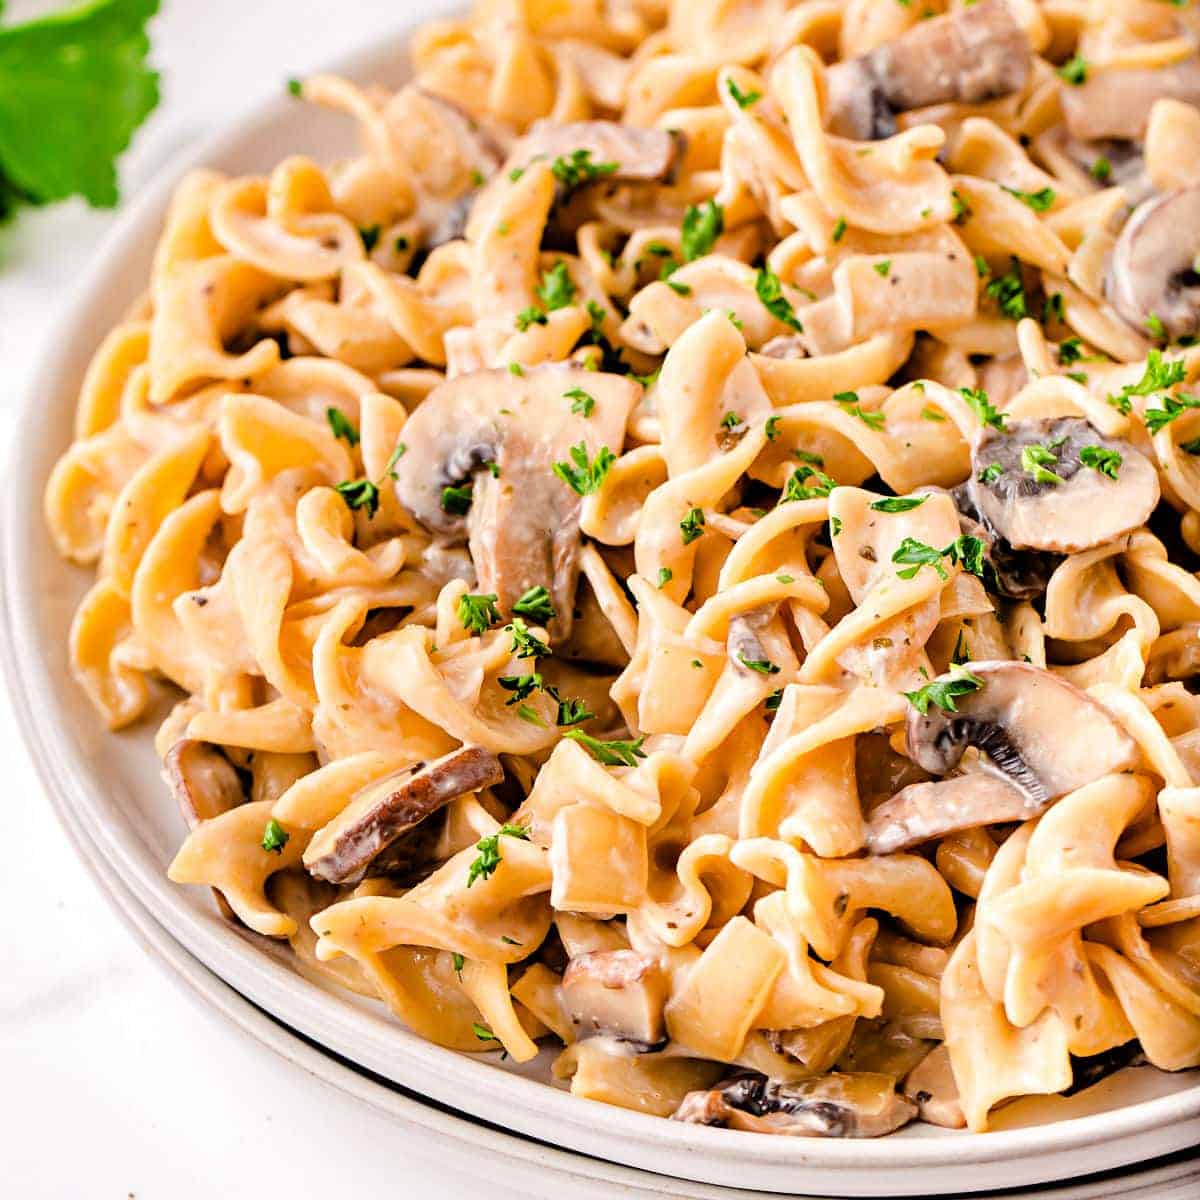 A close up view of mushroom stroganoff on a white plate.